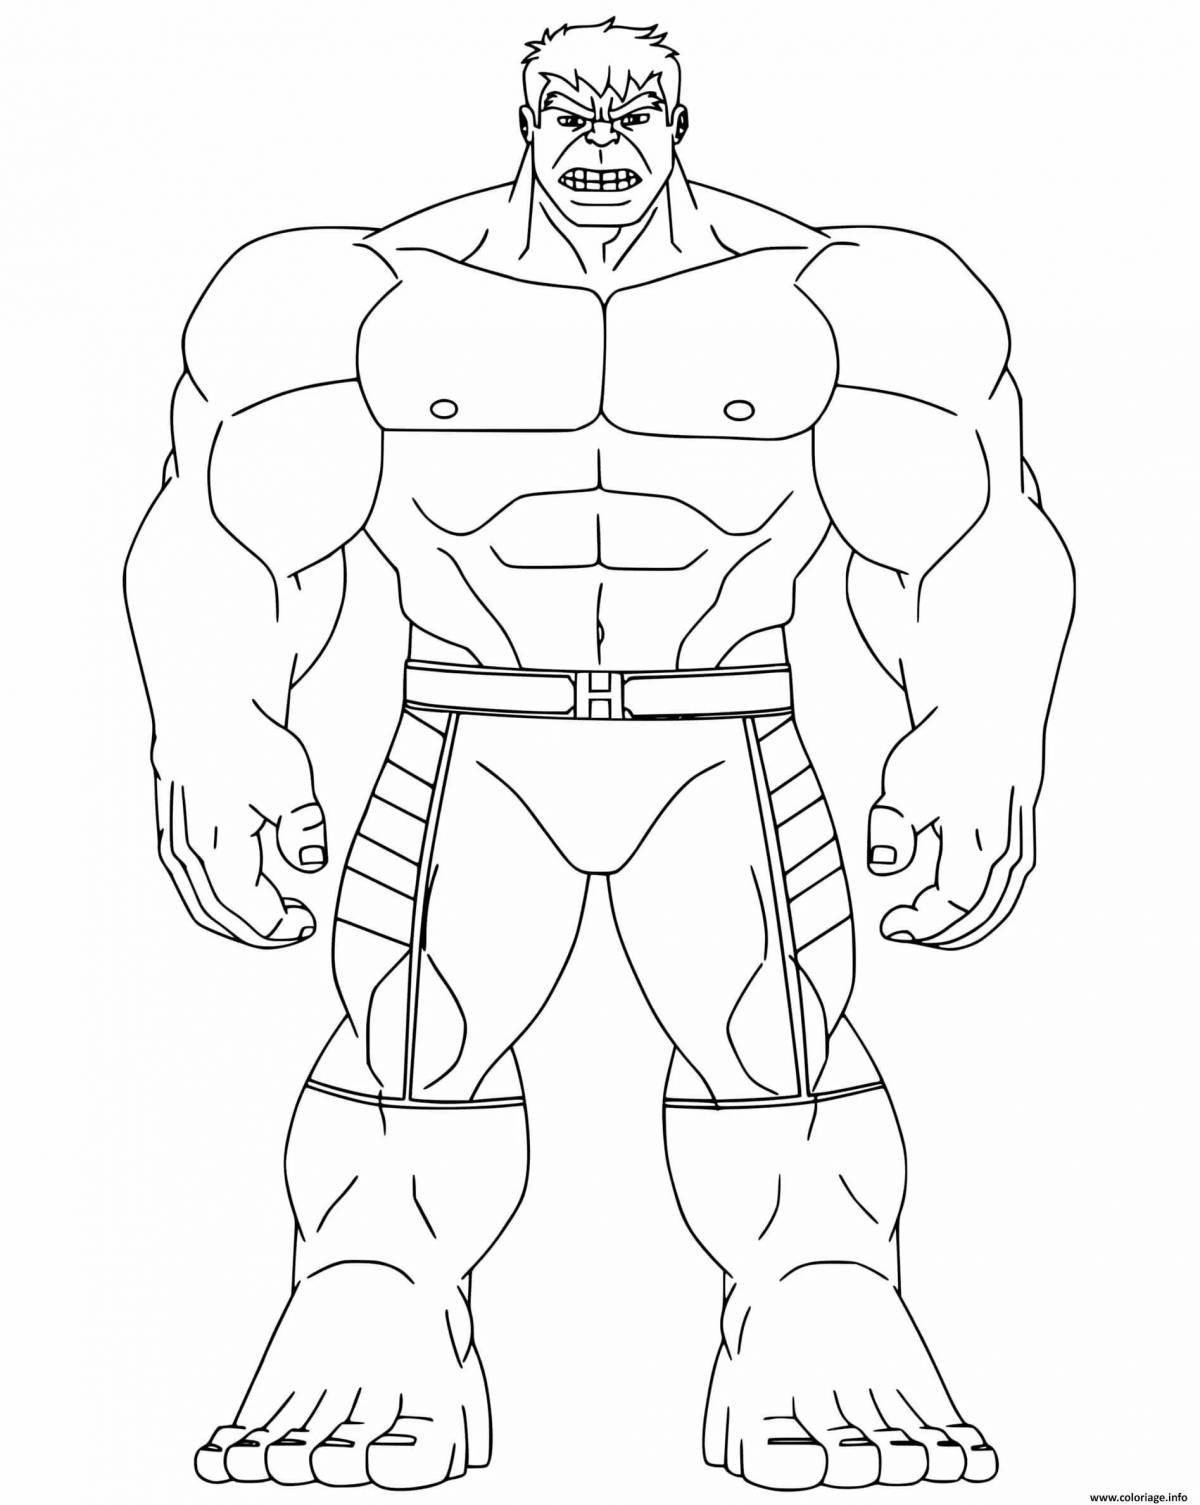 Colorfully crafted hulk coloring page